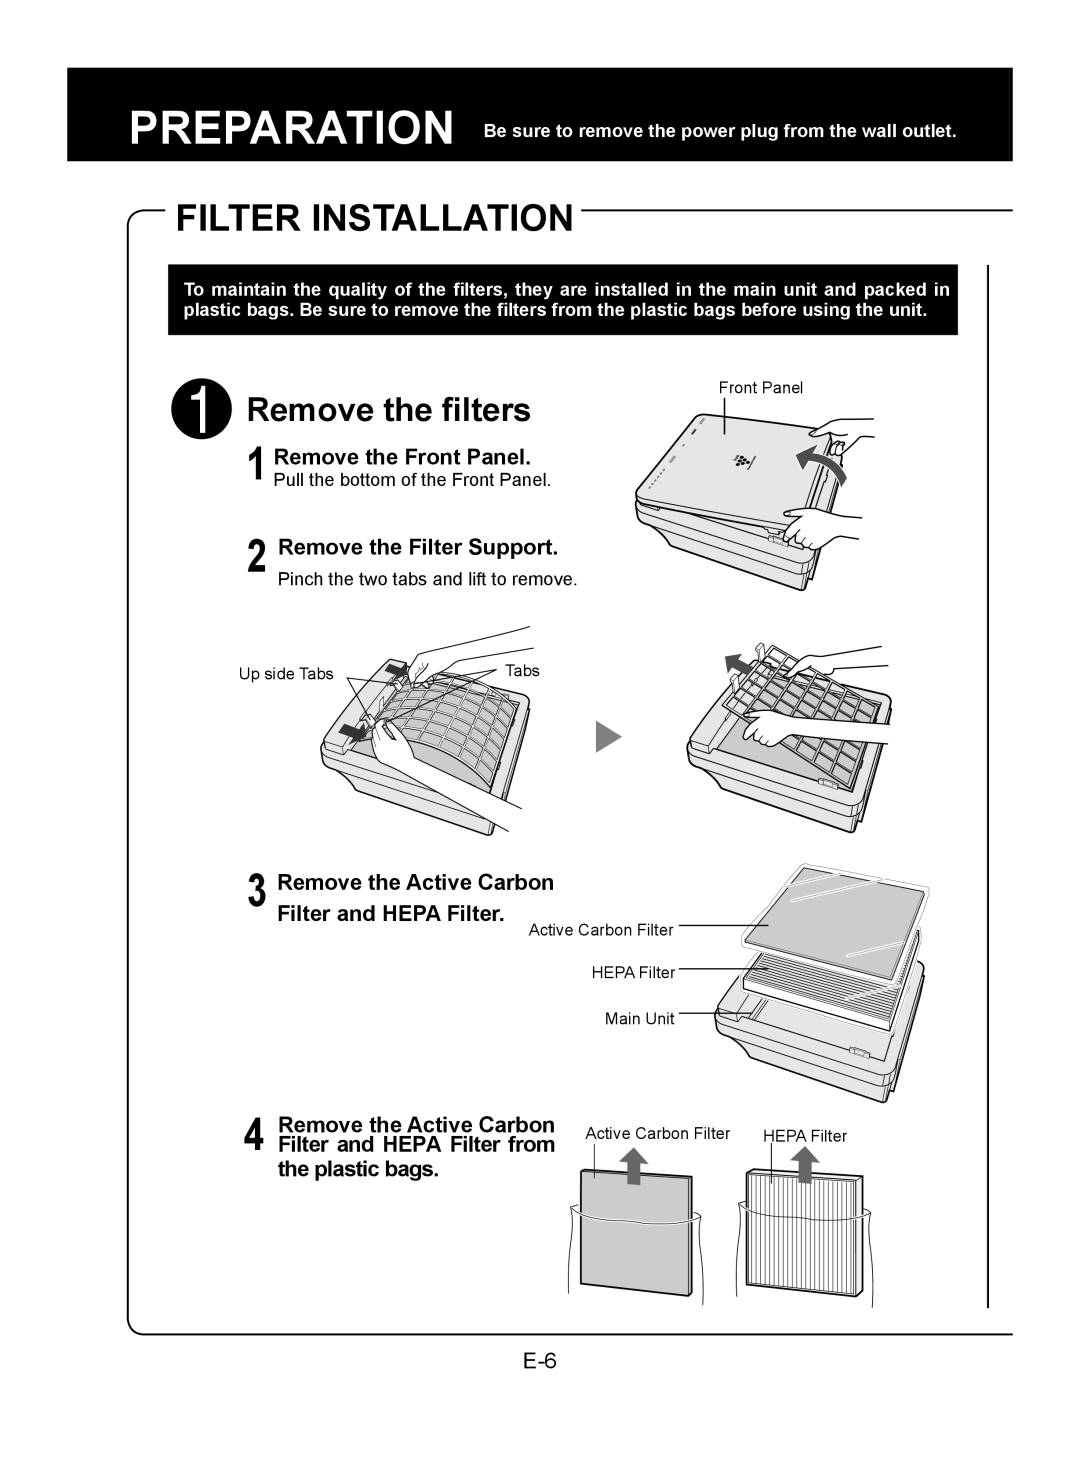 Sharp FU-W28E Filter Installation, Remove the filters, Remove the Active Carbon, Filter and HEPA Filter from 